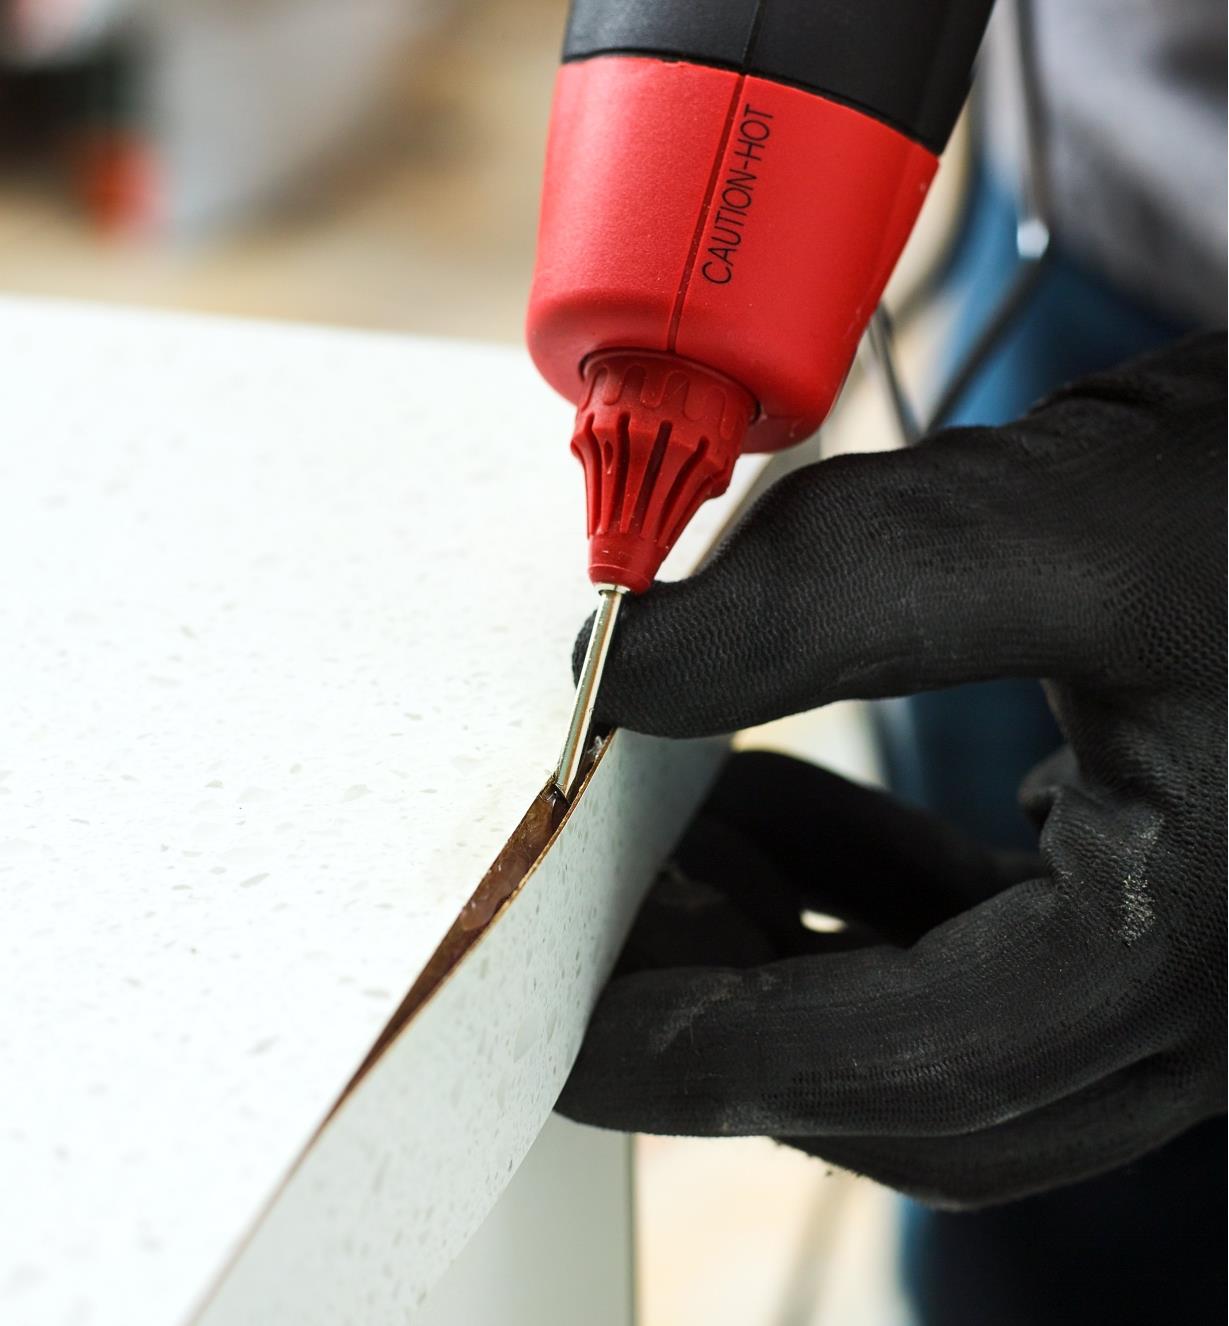 Using the FastenMaster pro hot-melt gun repair nozzle to inject glue under a section of lifted edge trim